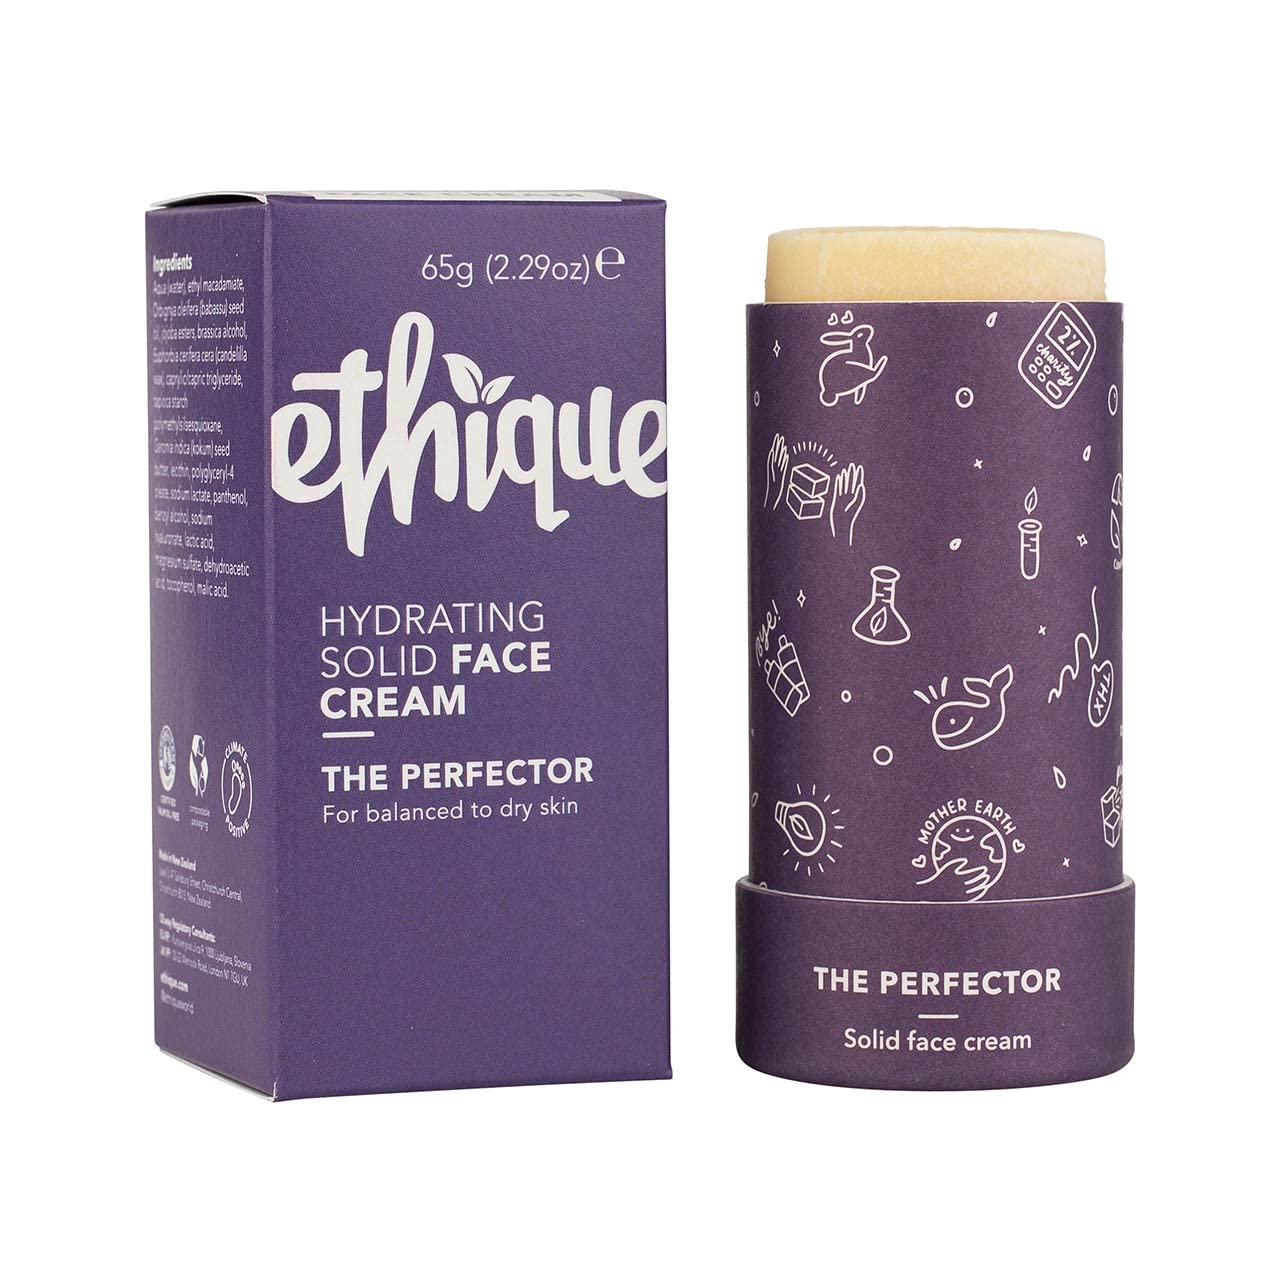 Ethique The Perfector Hydrating Solid Face Cream Tube for Dry Skin - Plastic-Free, Vegan, Cruelty-Free, Eco-Friendly, 2.29 oz (Pack of 1)